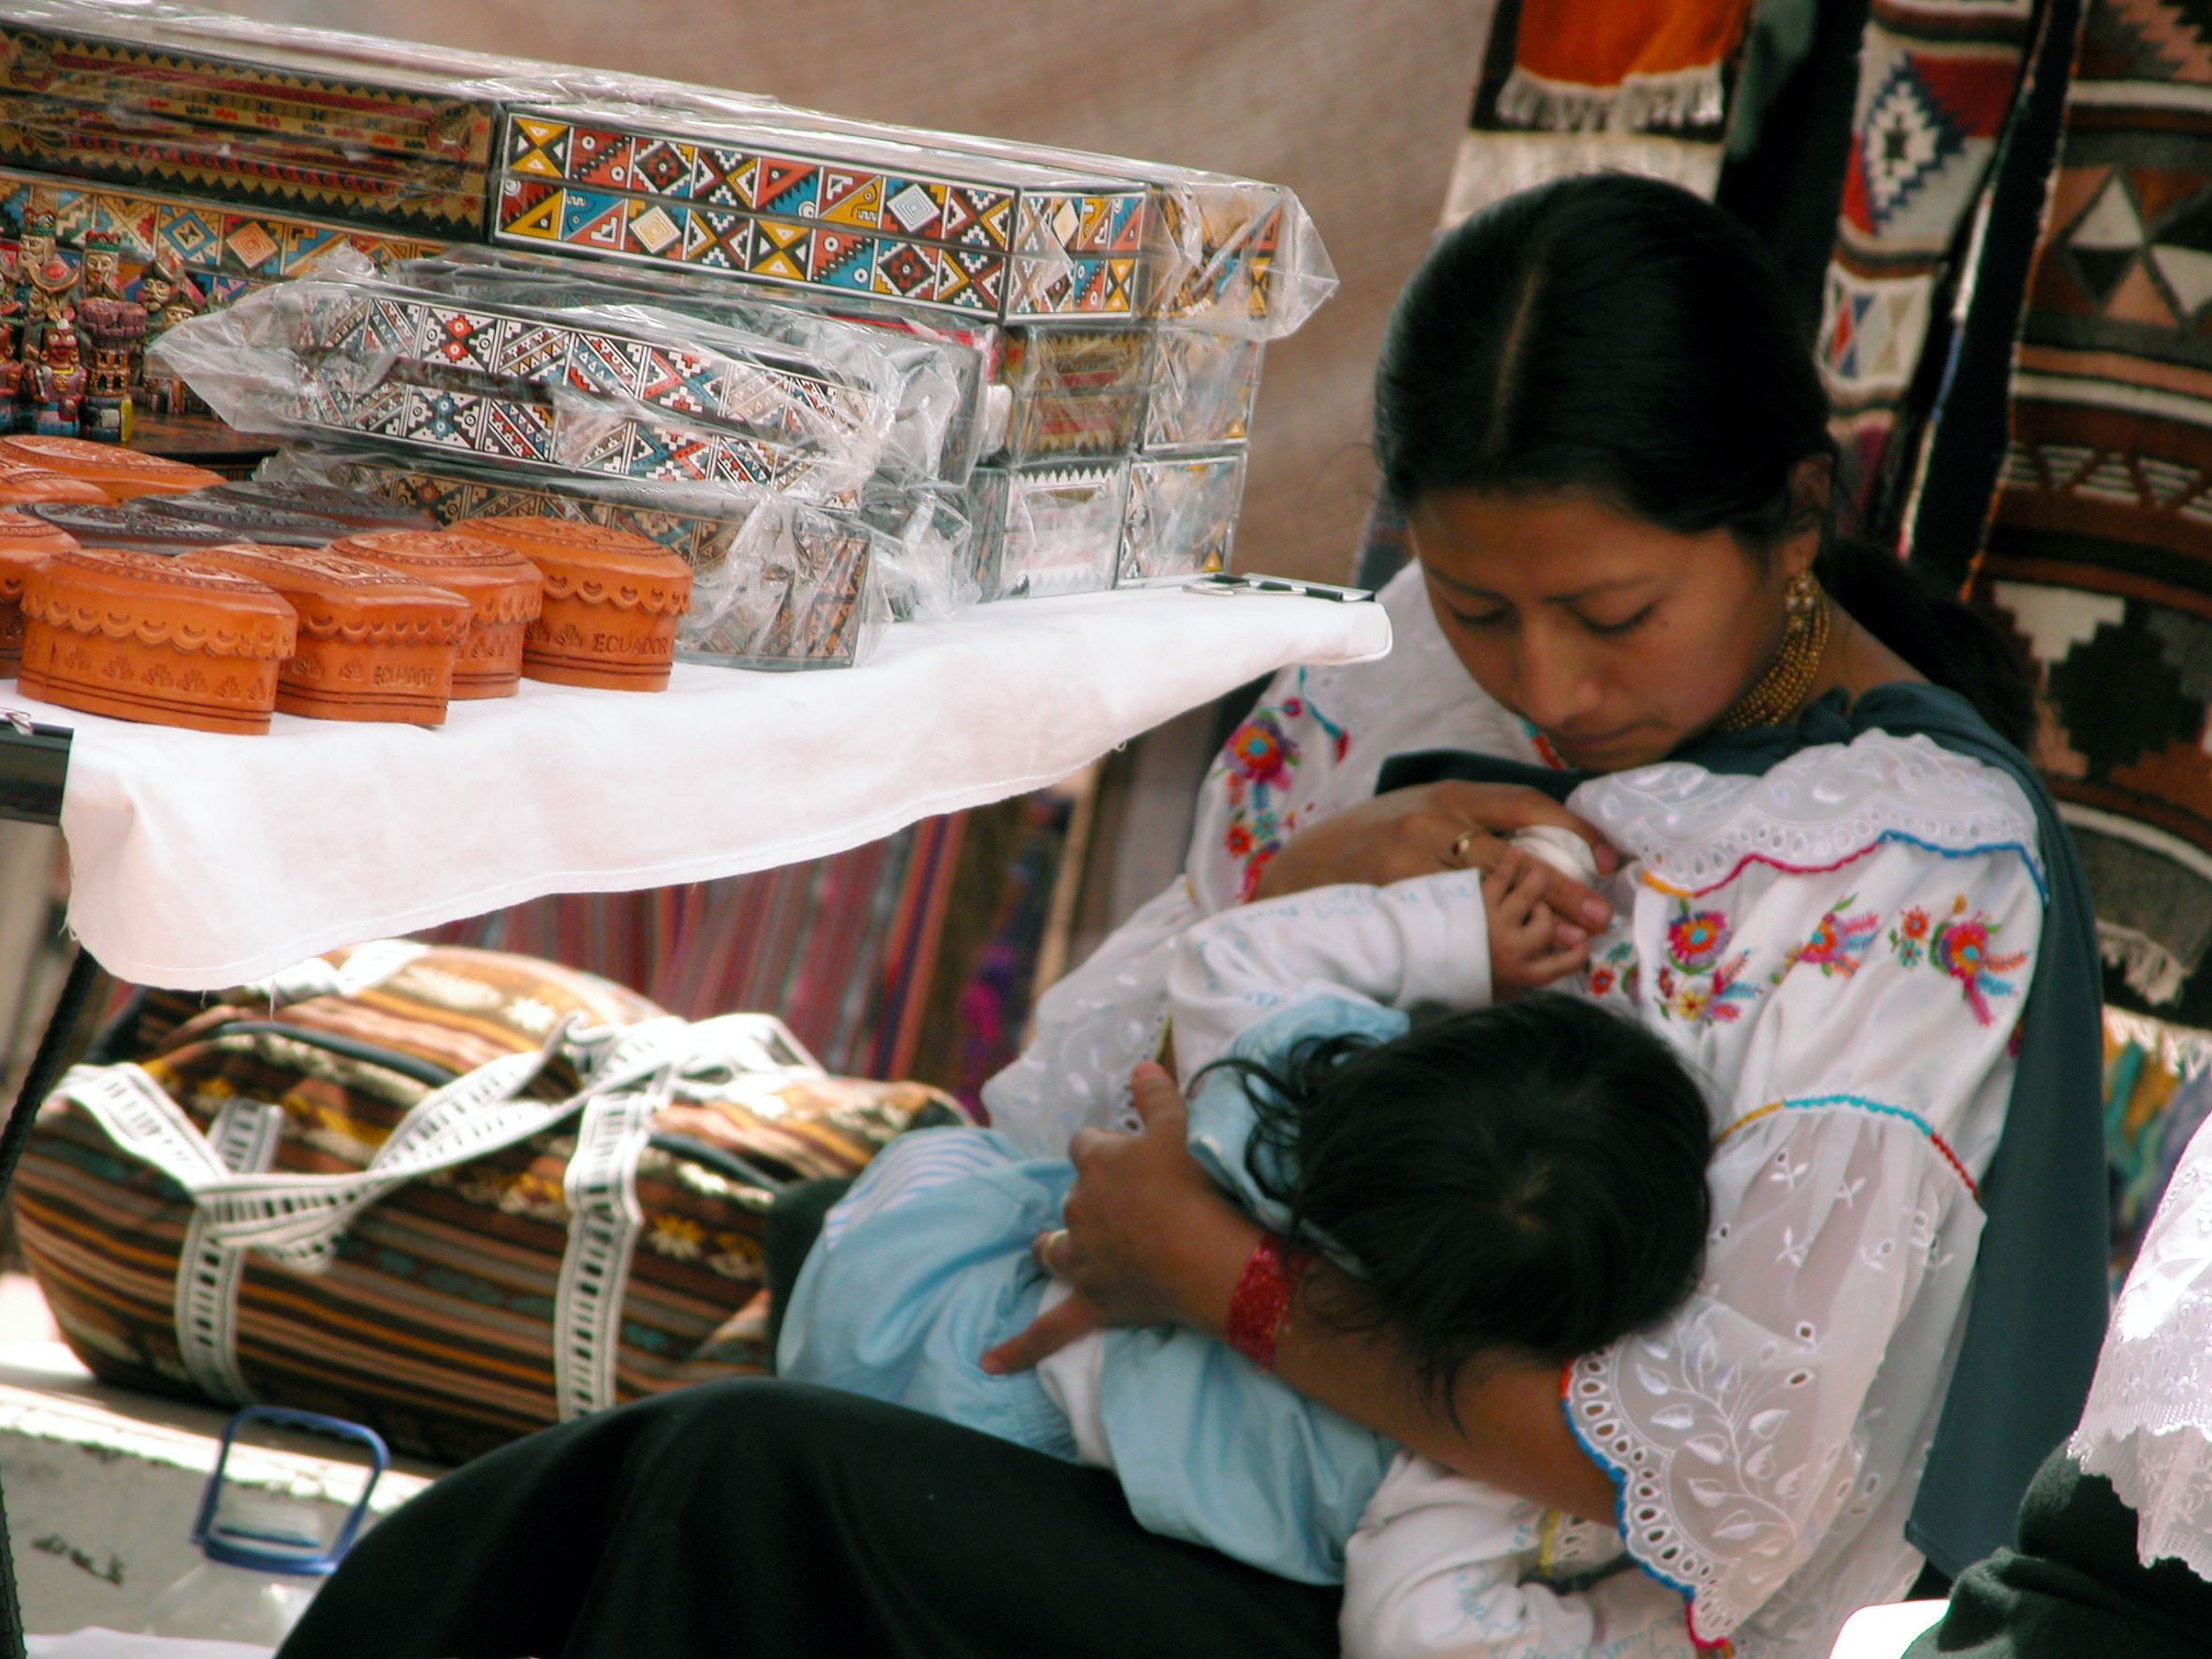 A woman, possibly indigenous from Ecuador, is seated and breastfeeding her toddler daughter. The mother seems to be at a market, selling indigenous crafts.